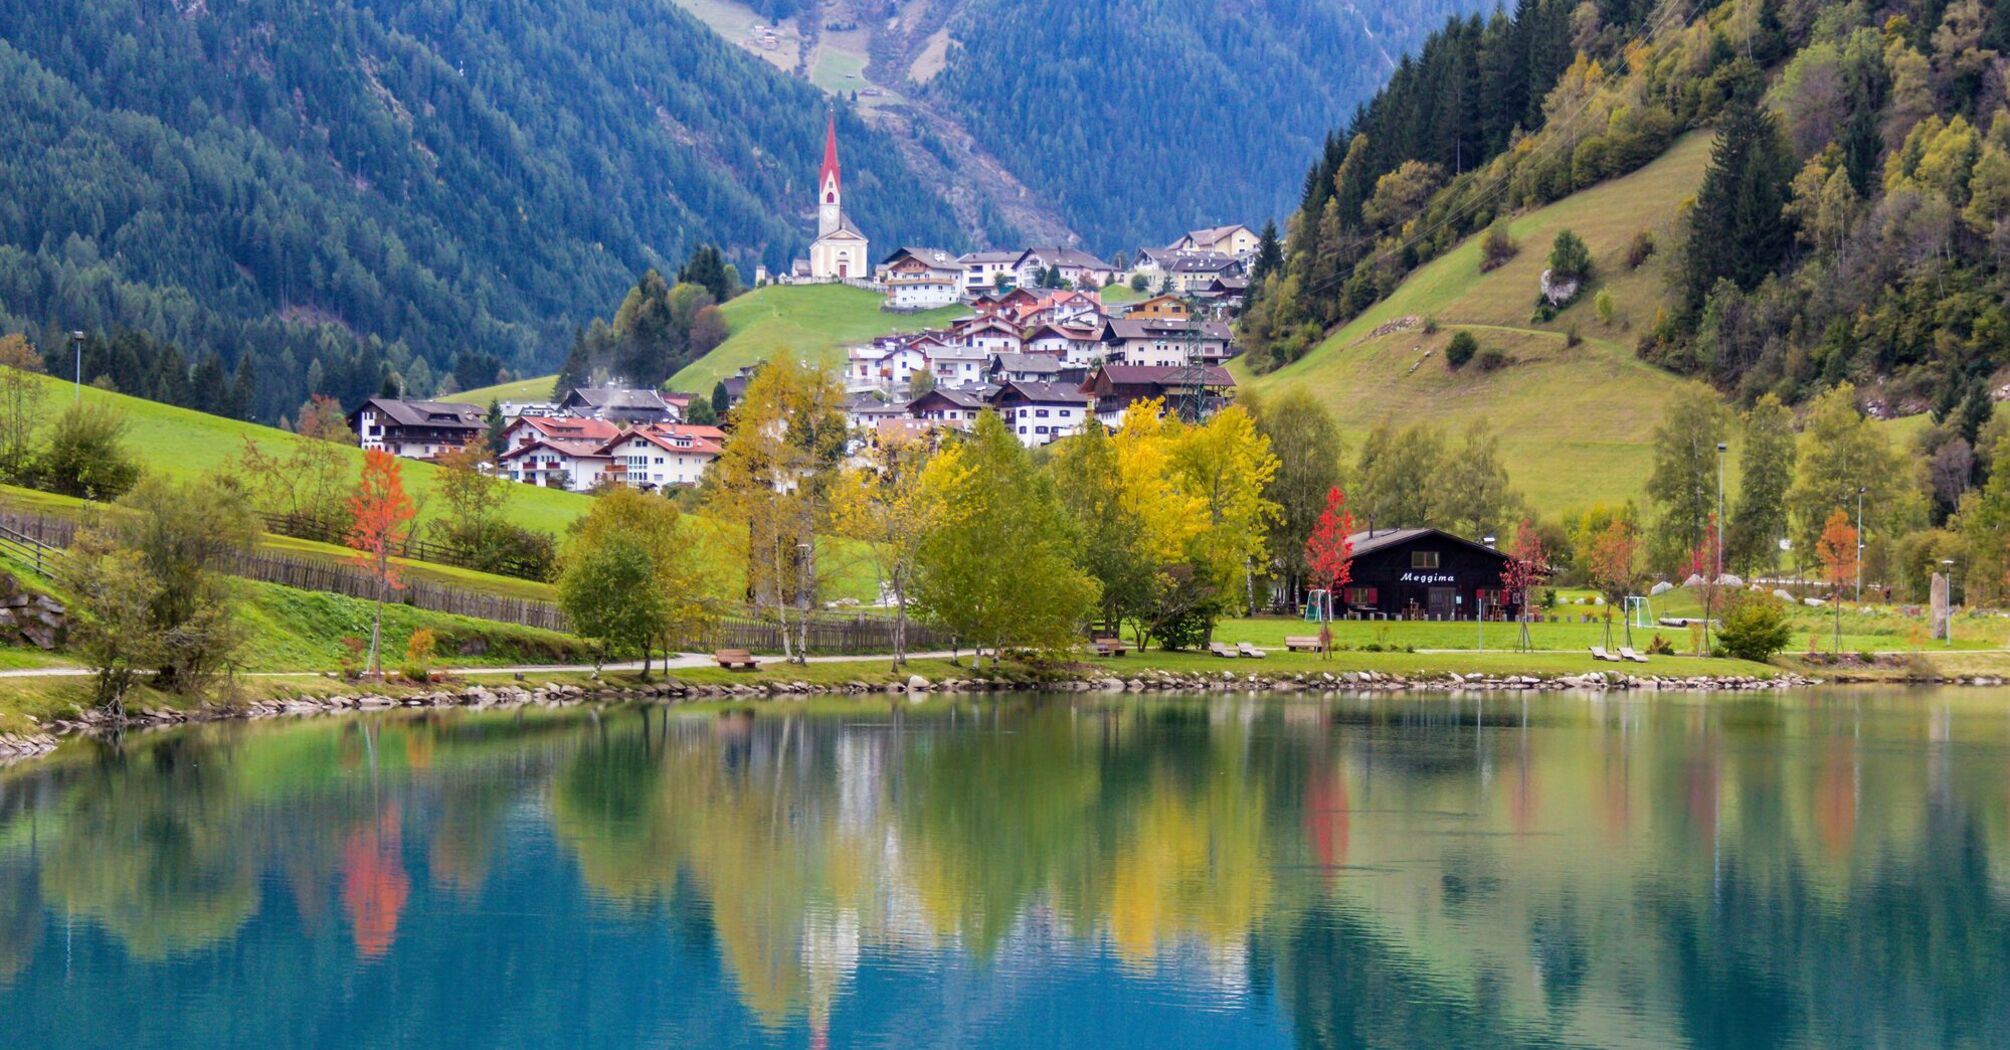 Scenic view of South Tyrol village with a church, reflecting in a tranquil lake surrounded by autumn-colored trees and green hills